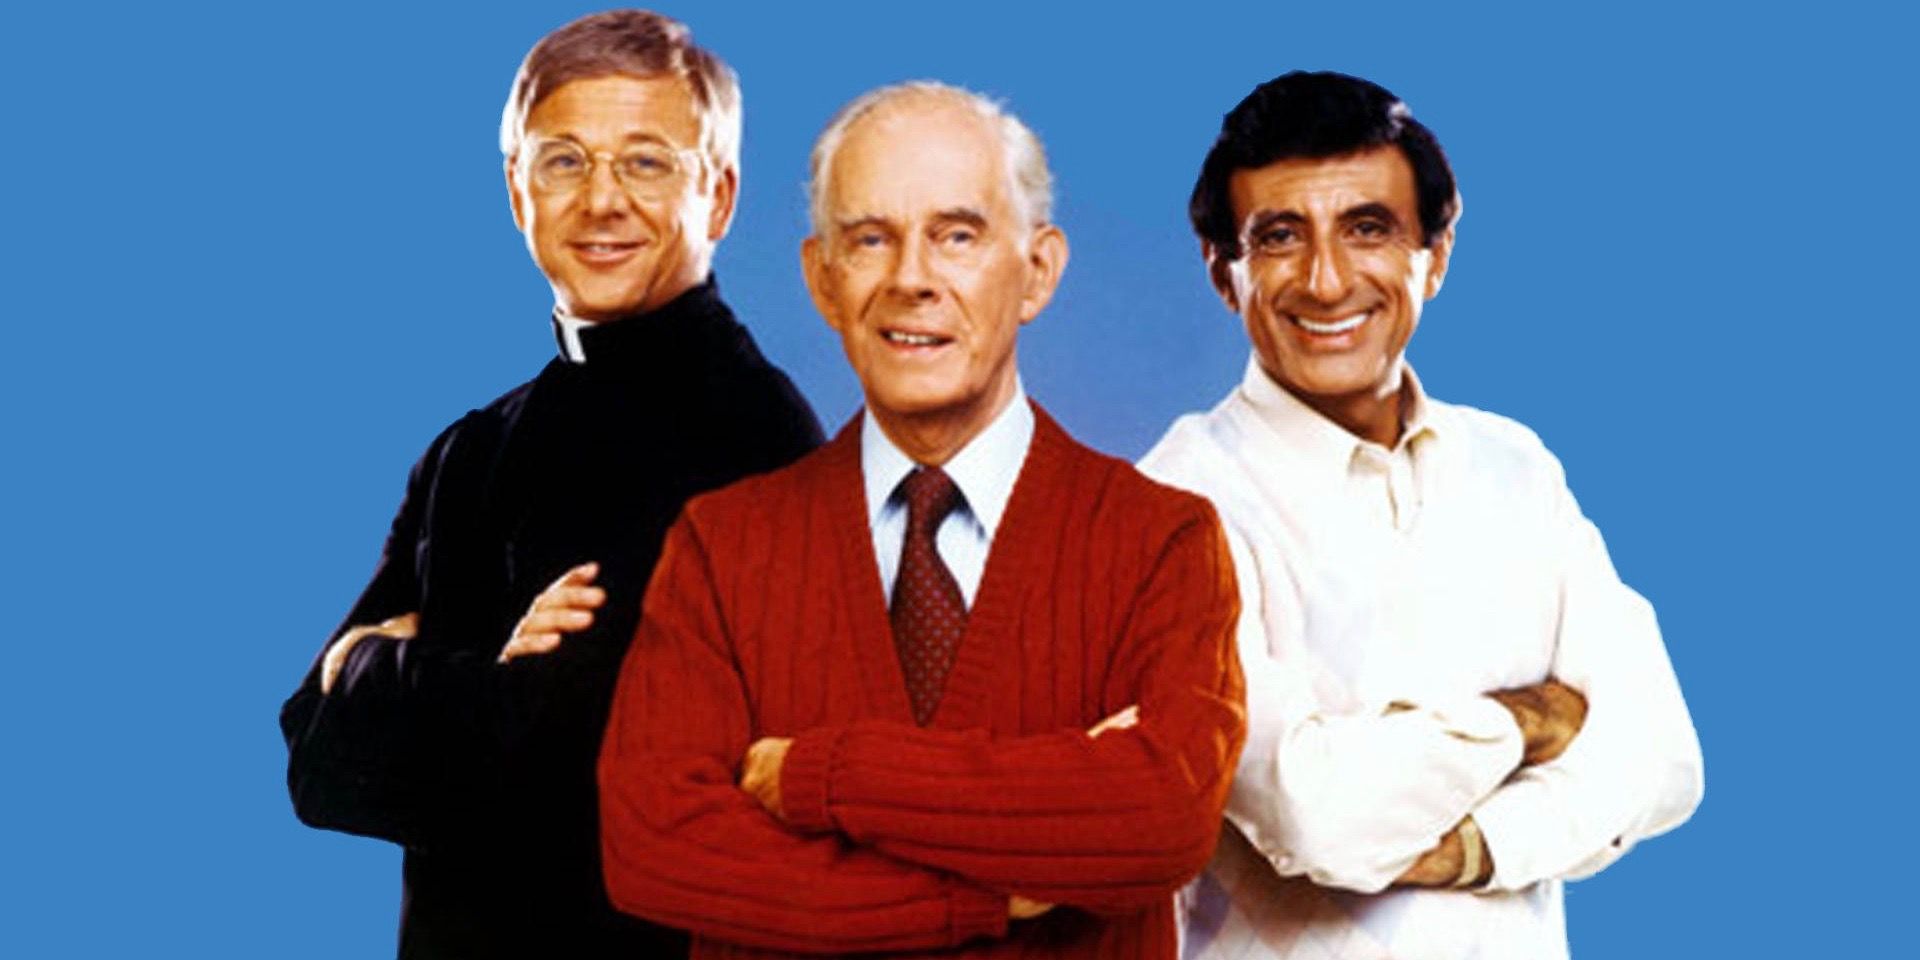 After MASH starring William Christopher, Jamie Farr, and Harry Morgan